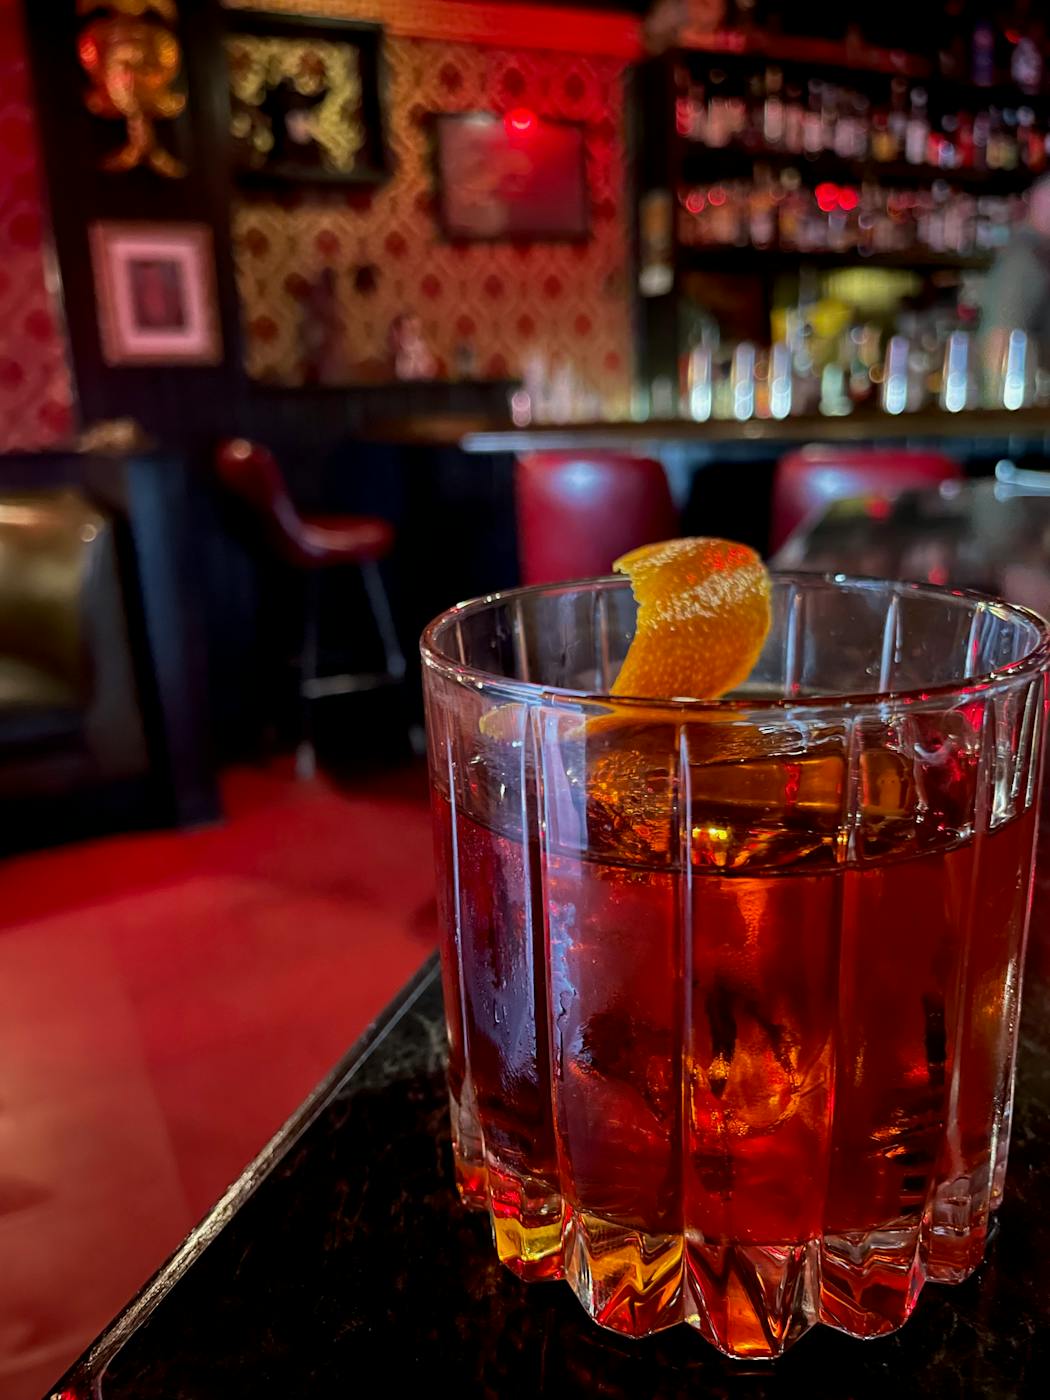 The smoky bitter flavors in the Oaxacan negroni perfectly suit this aging Chinese restaurant turned cocktail bar.